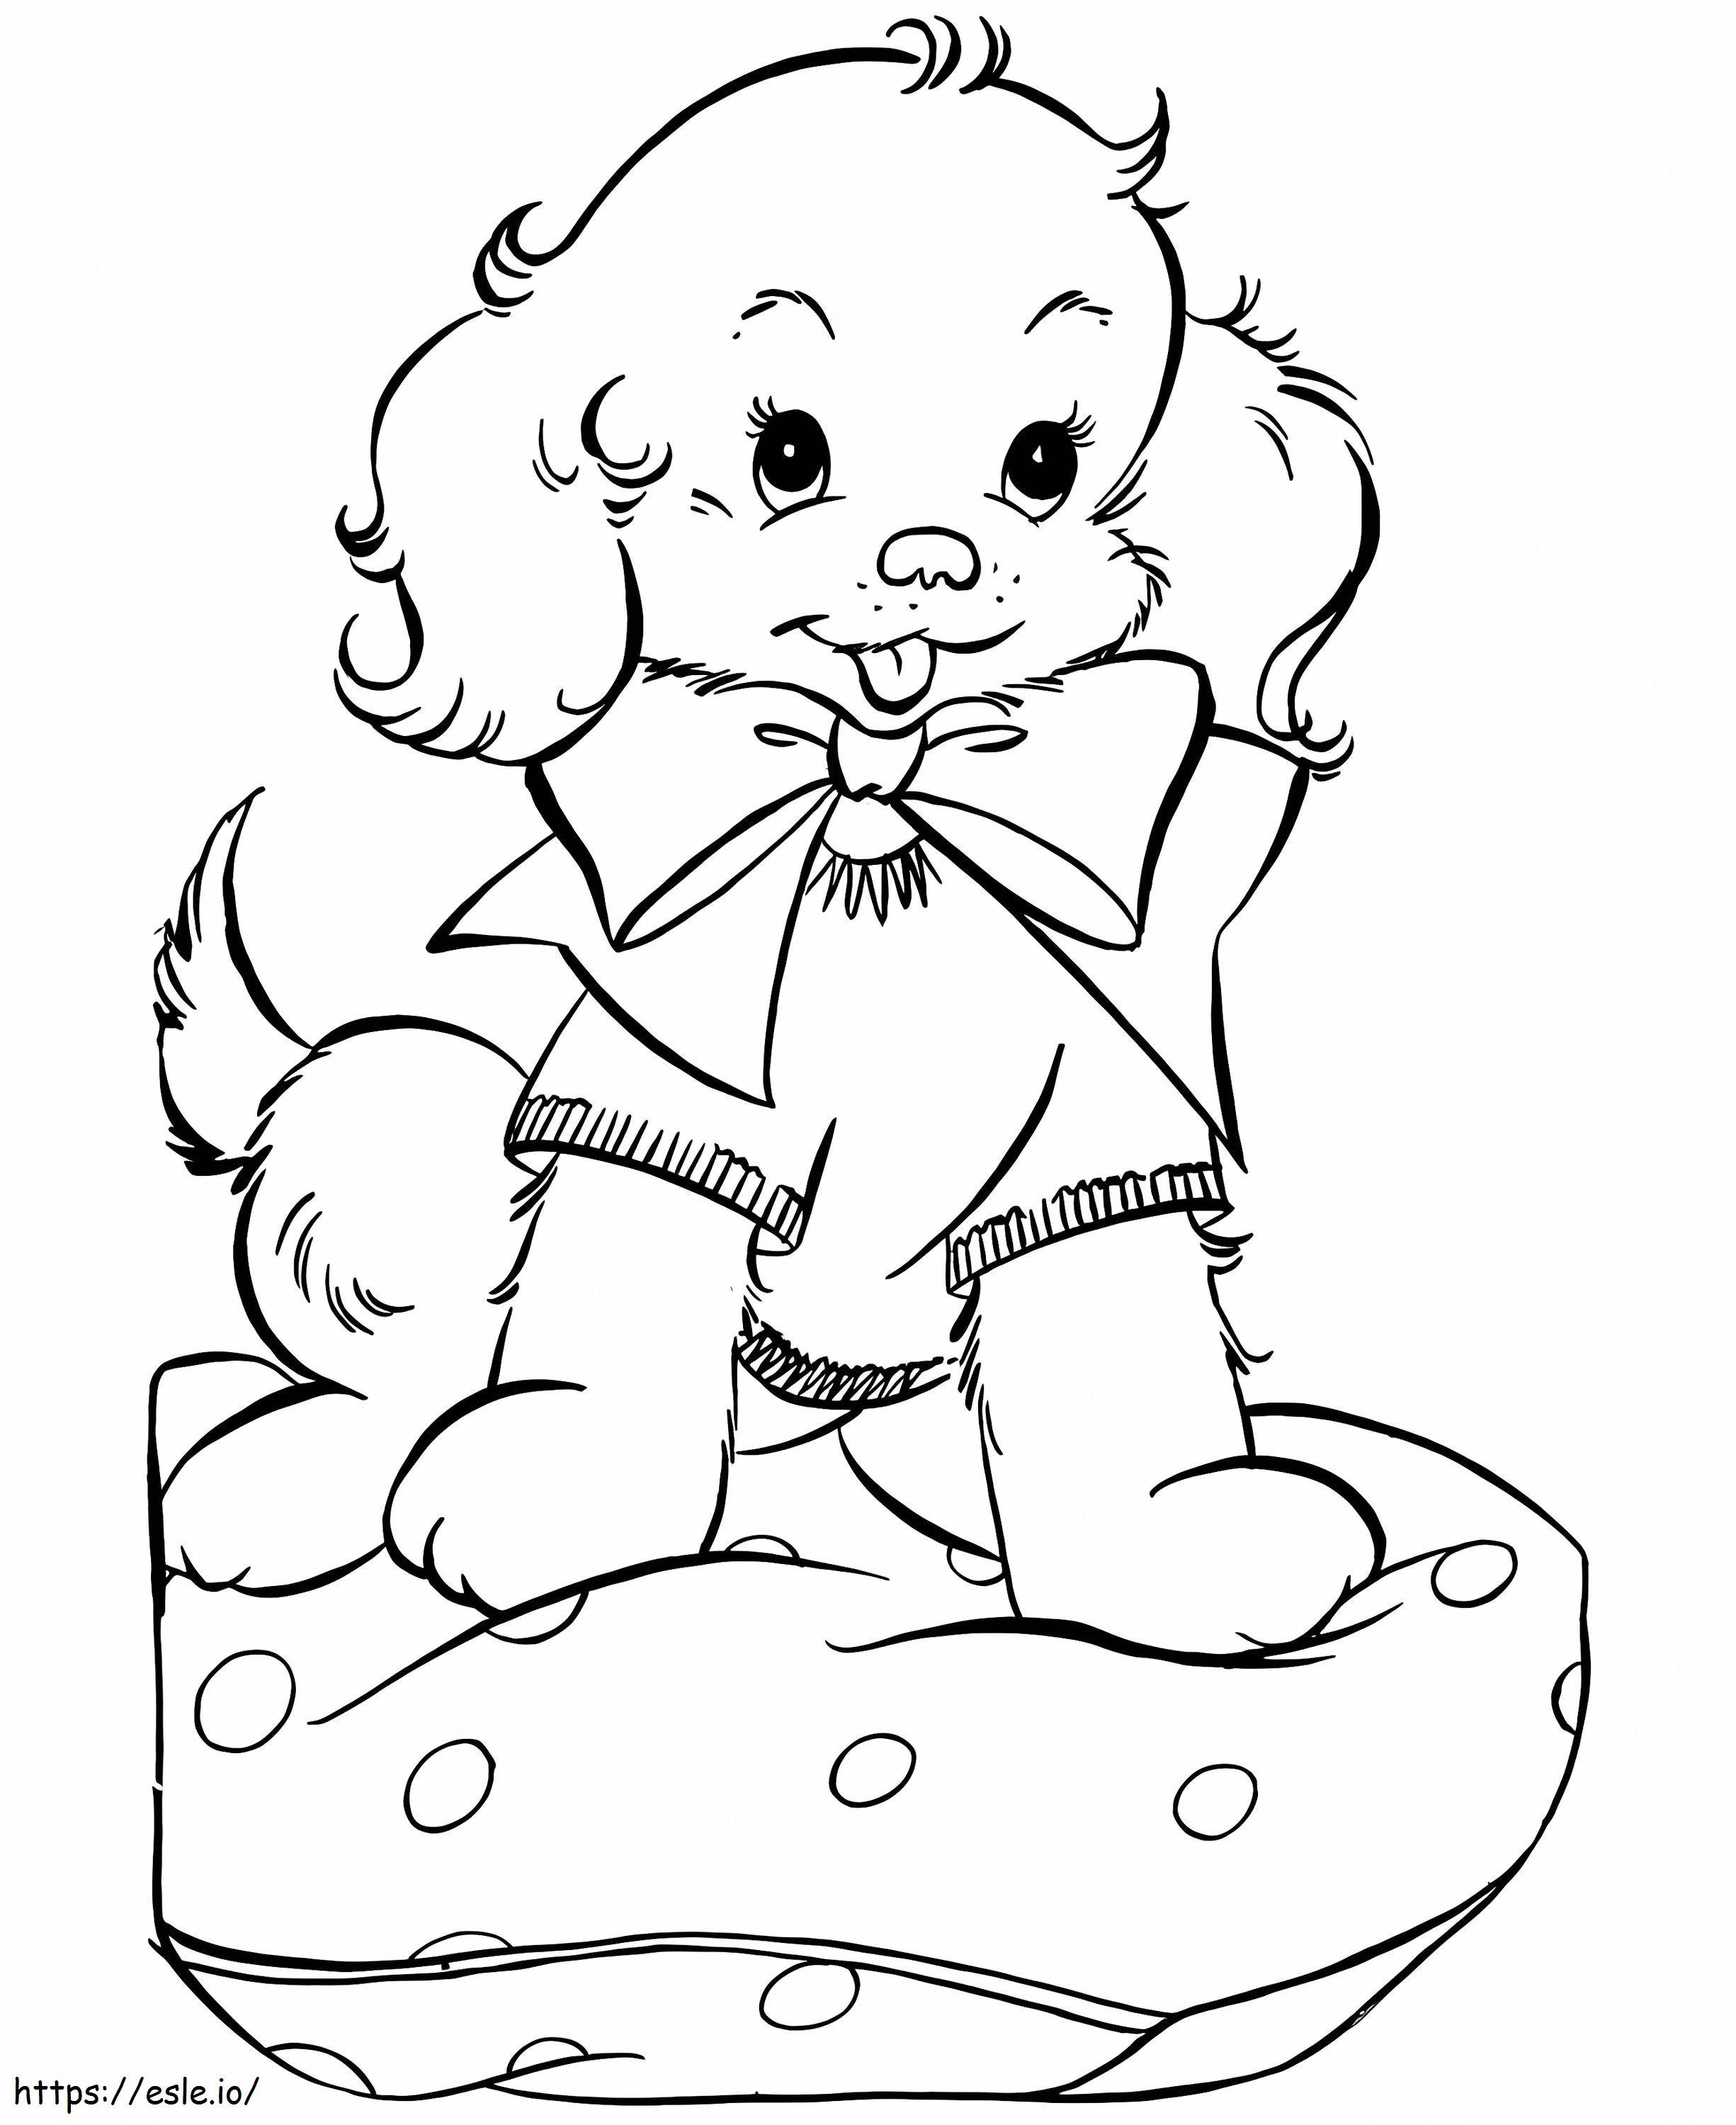 Cute Puppy On Pillow coloring page